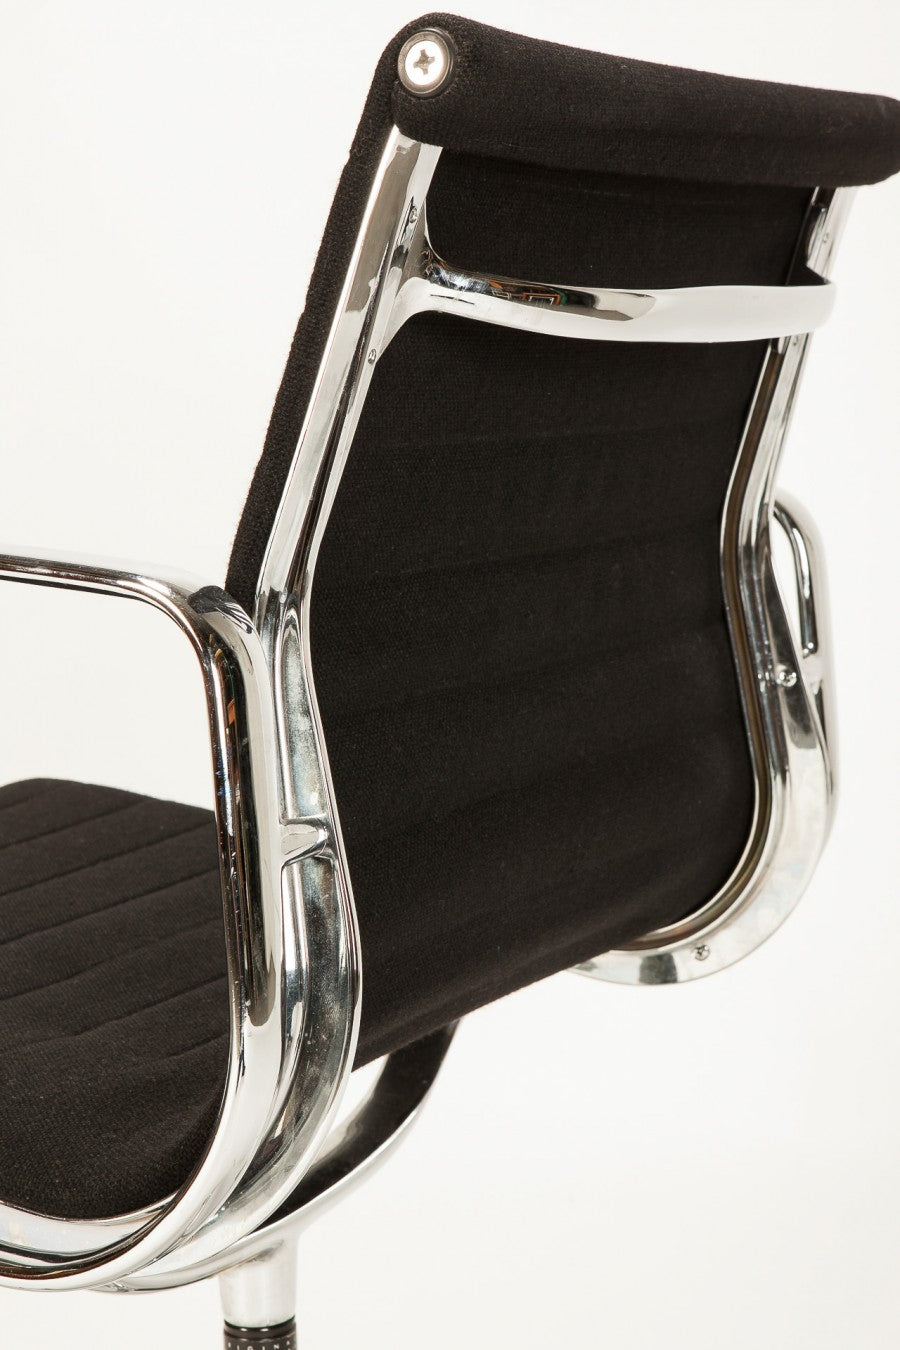 Eames Alu EA 108 von Charles and Ray Eames